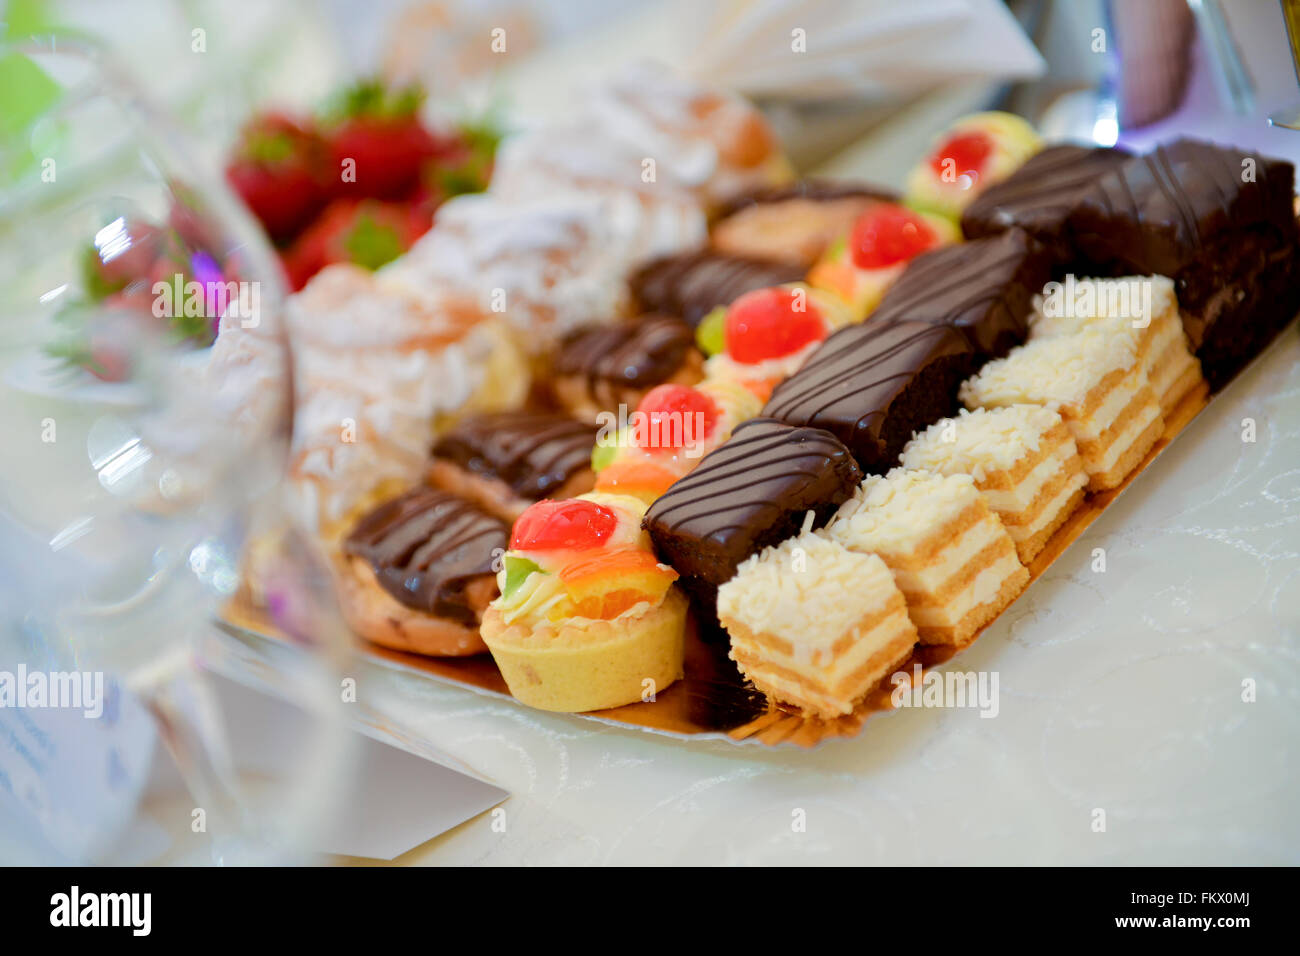 Lots of chocolate and vanilla cakes Stock Photo